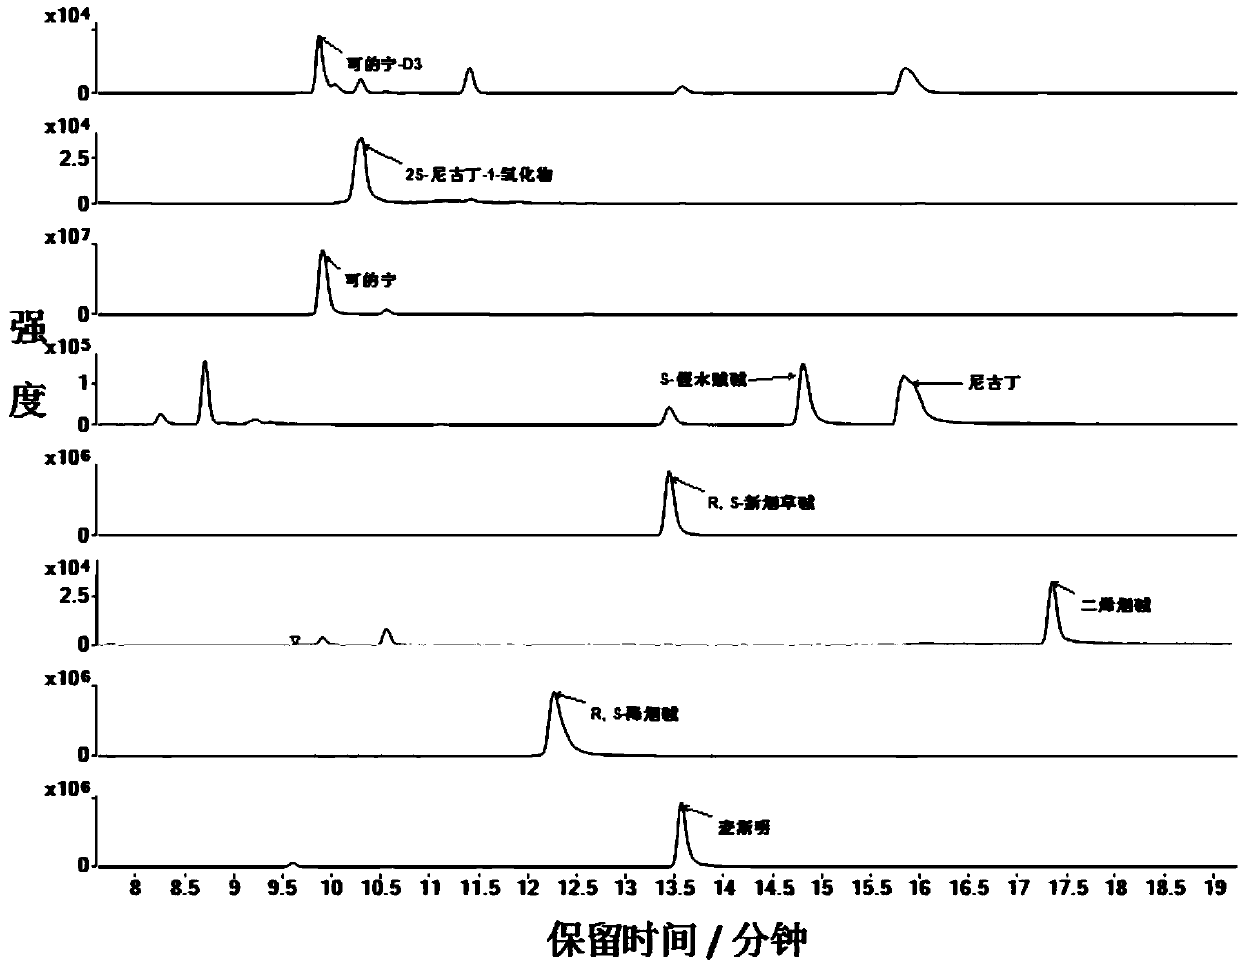 Method for measuring content of secondary alkaloid in nicotine